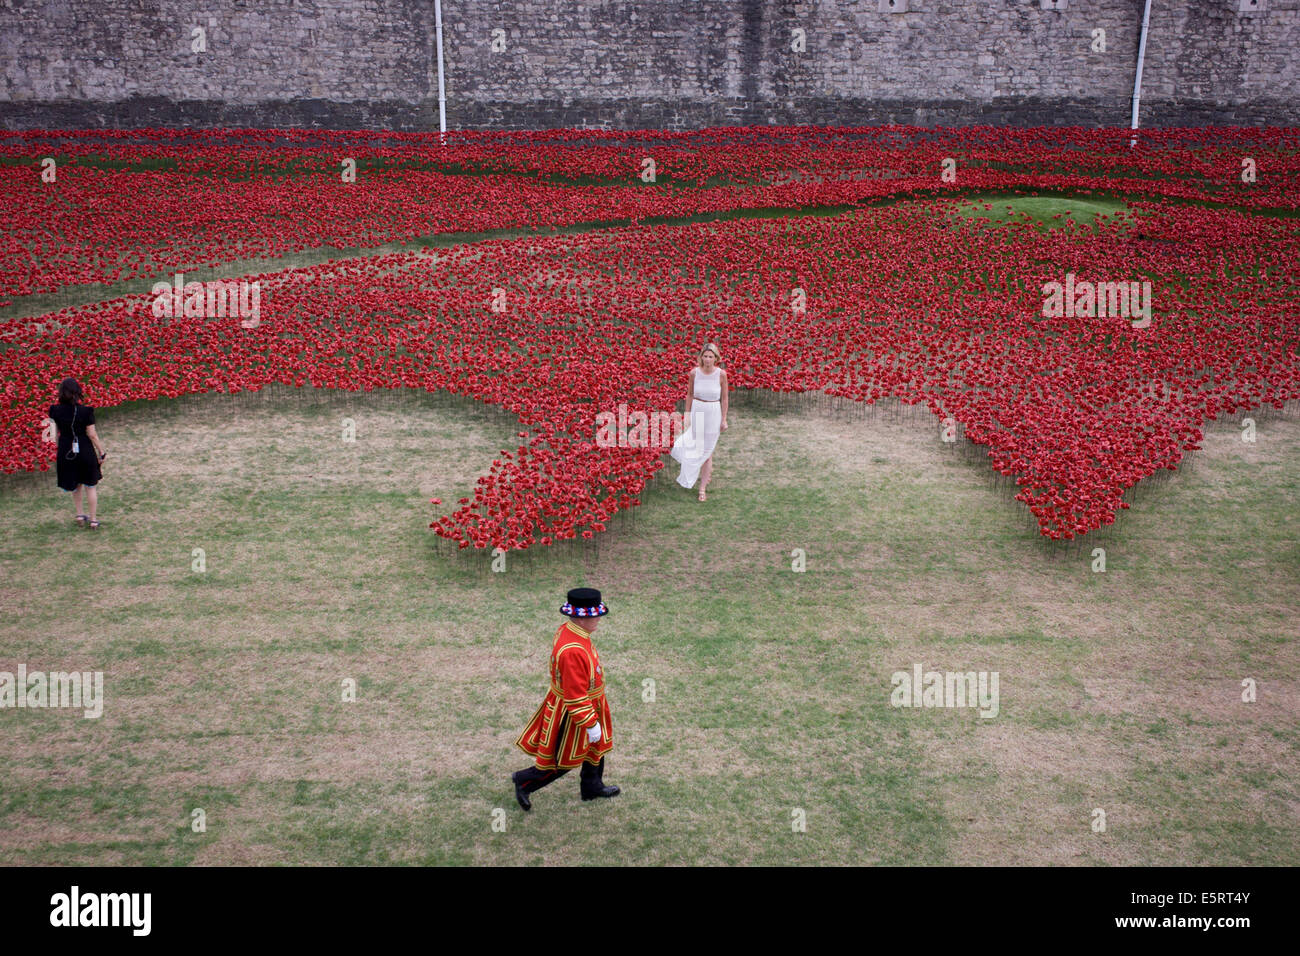 London, UK 5th August 2014: Marking the centenary of the beginning of the First World War (WW1) in 1914, a Tower of London Beefeater walks past TV presenters among some of the 888,246 ceramic poppies - one for each British military death - created by artist Paul Cummins. Remaining in place until the date of the armistice on November 11th. Across the world, remembrance ceremonies for this historic conflict that affected world nations, London saw many such gestures to remember the millions killed in action at the beginning of the 20th century. Credit:  Richard Baker / Alamy Live News. Stock Photo